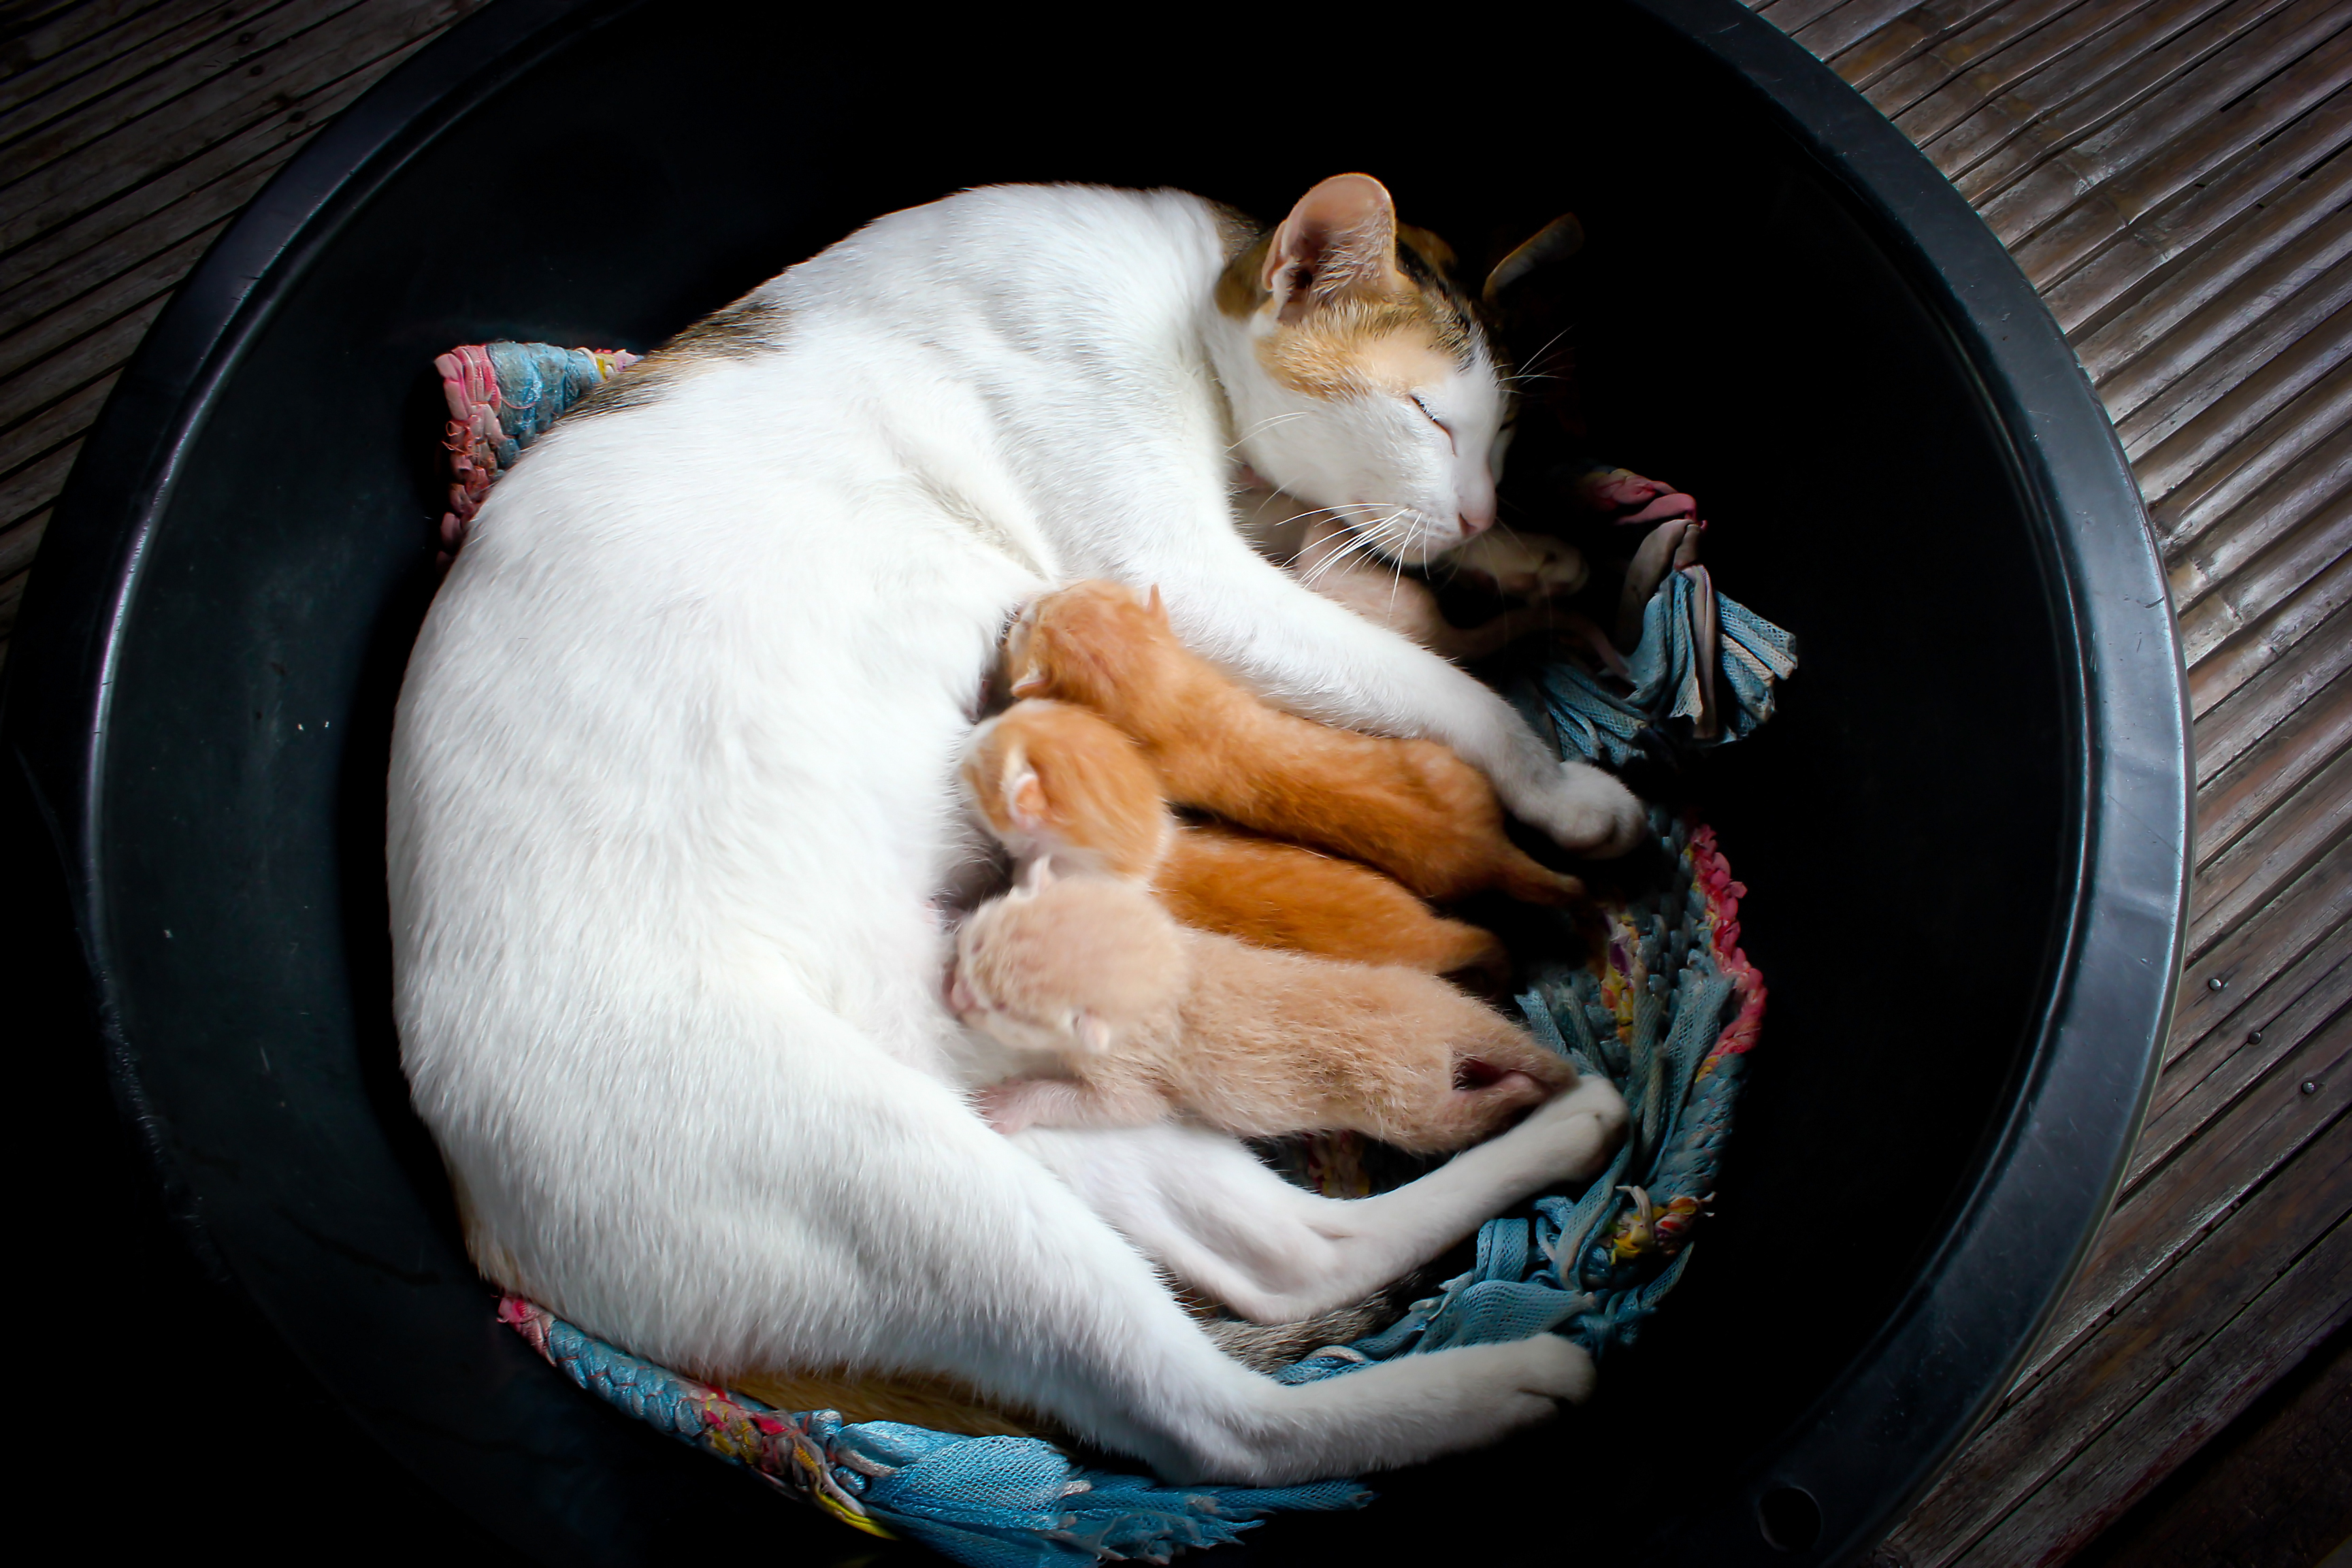 how to care for newborn kittens and mother cat